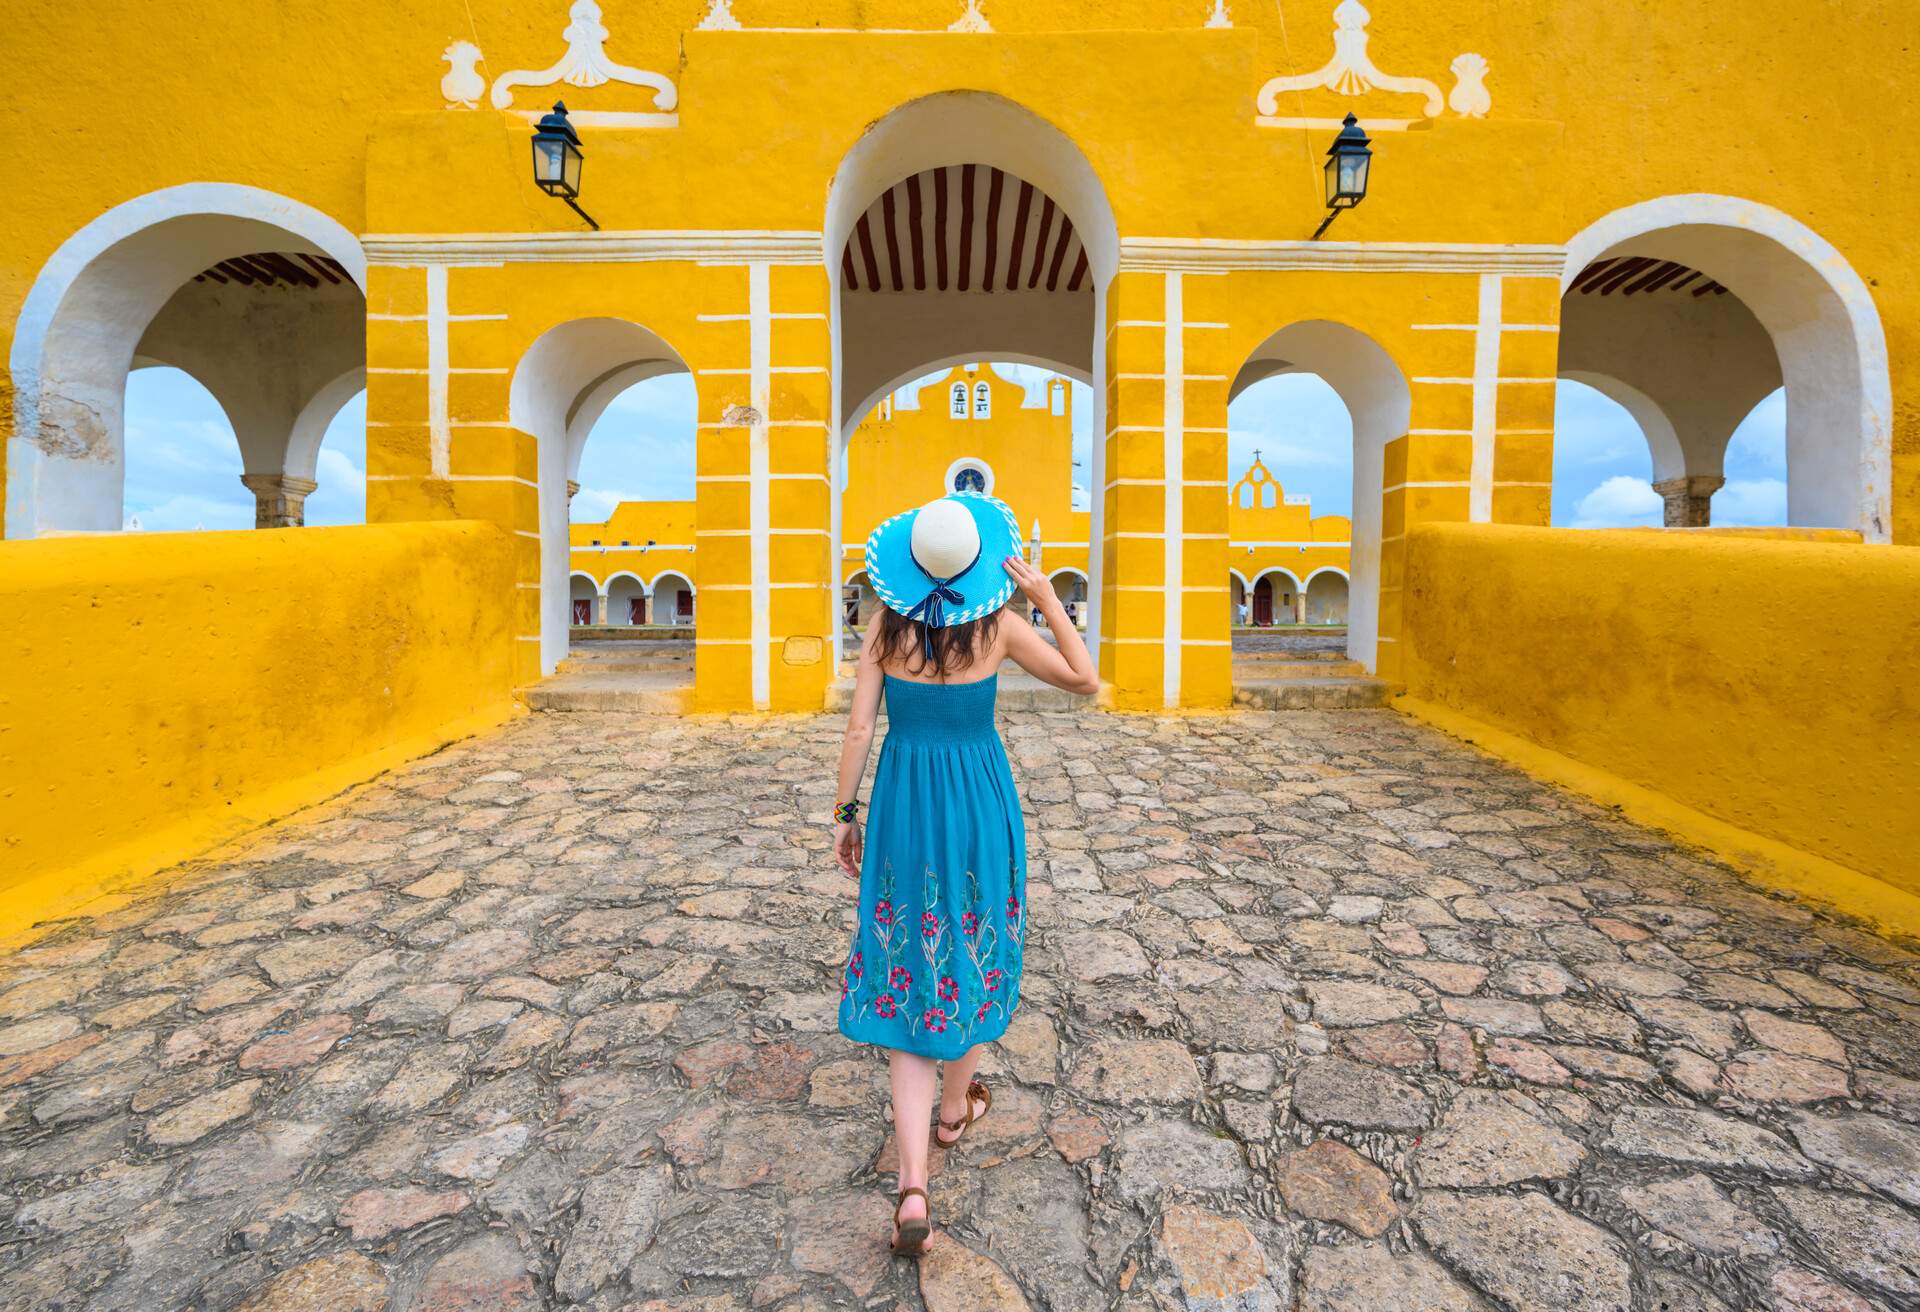 A woman in a blue dress and wide-brimmed hat walks towards a yellow building with multiple arch entrances.